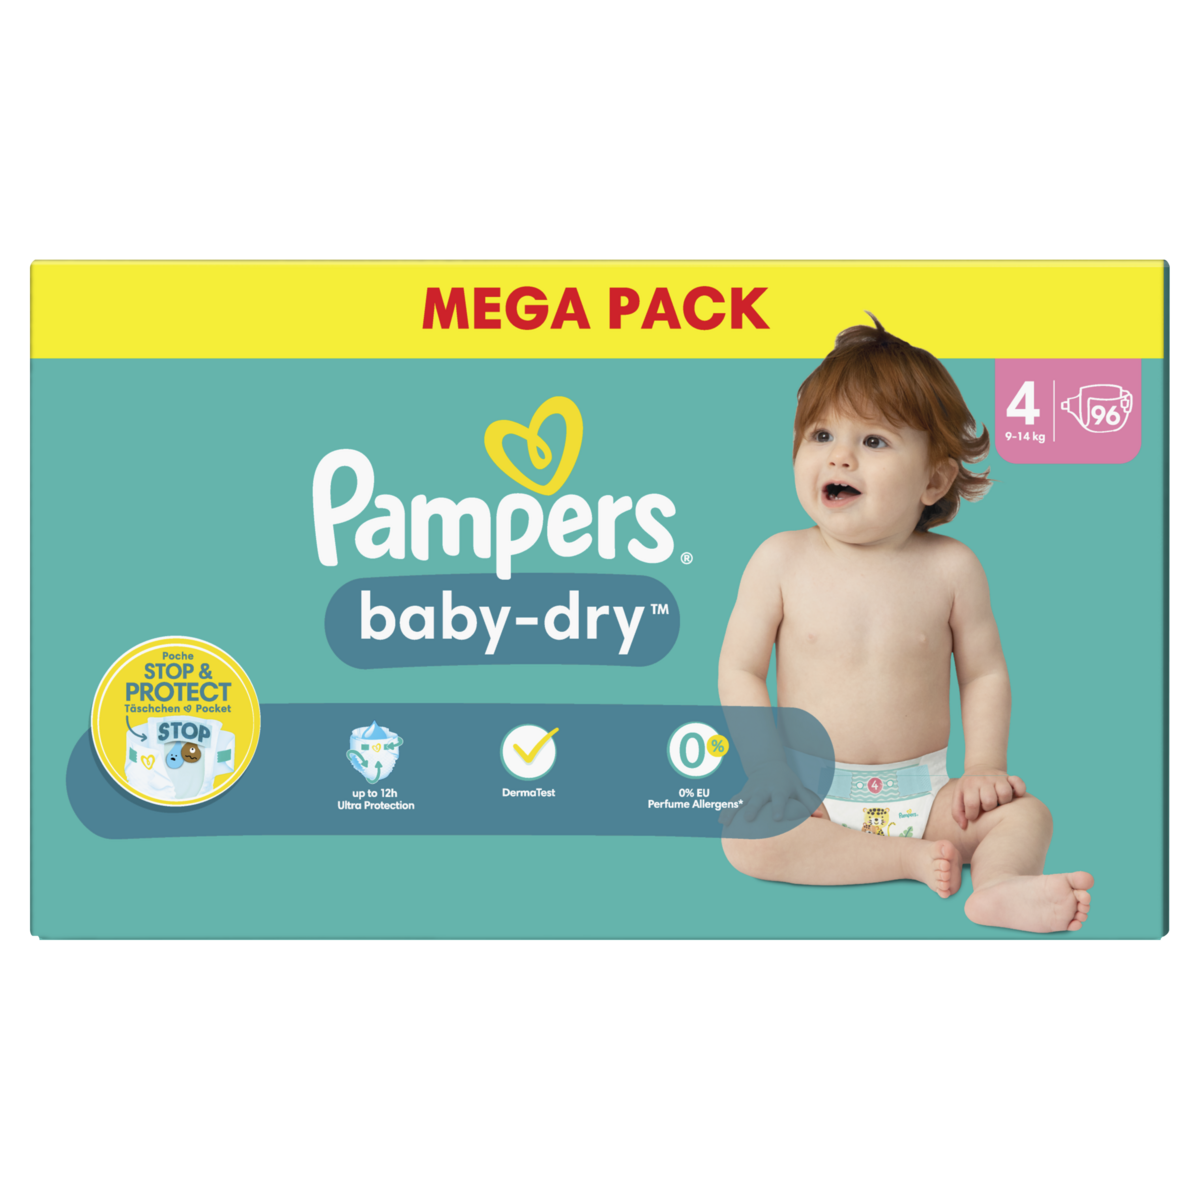 CHANGES BABY FRY MÉGA PAMPERS 